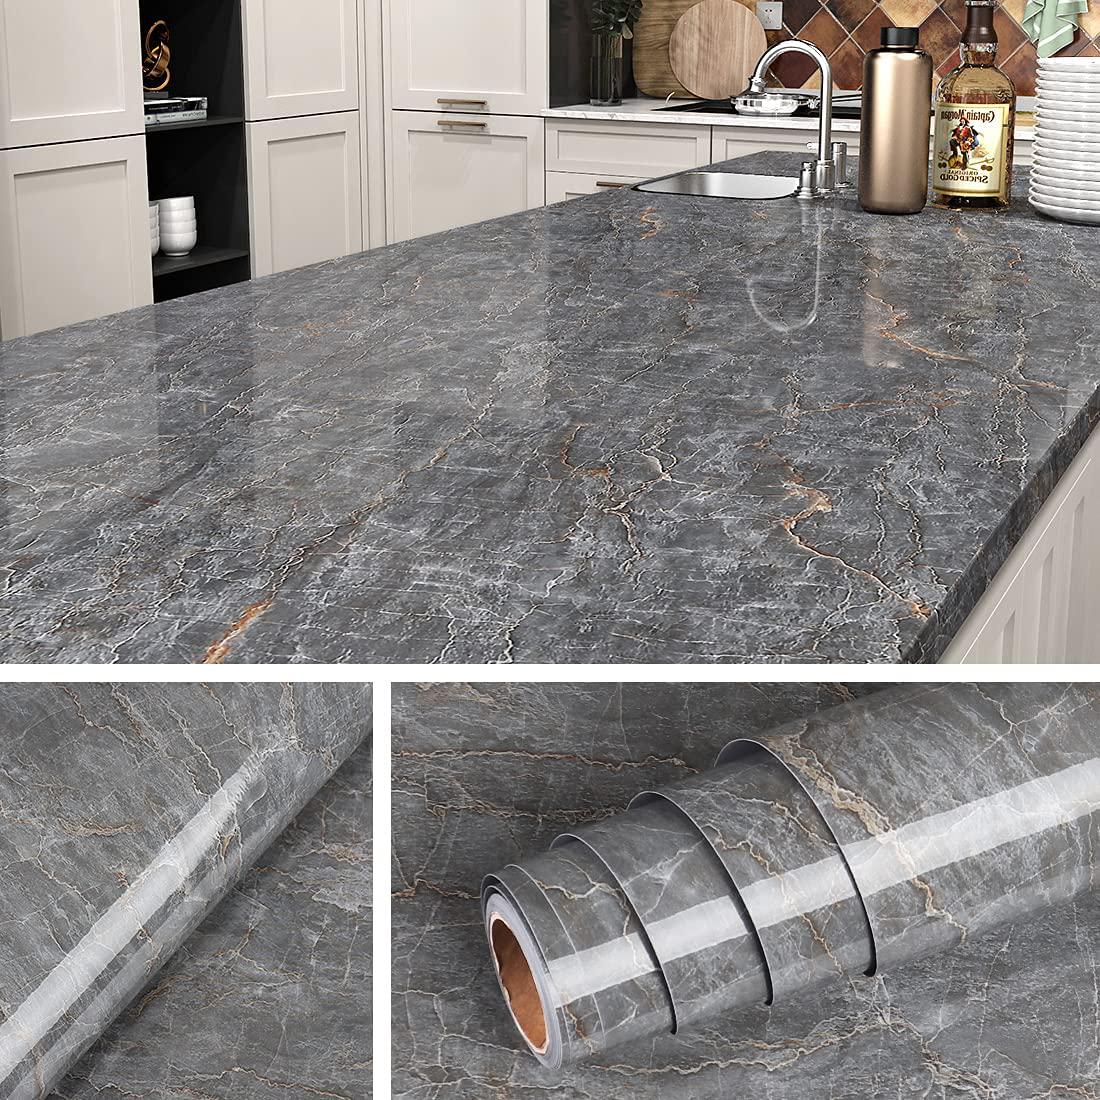 Livelynine, Livelynine 197 X 24 Inch Dark Gray Marble Contact Paper Self Adhesive Countertop Peel and Stick Countertops Waterproof Kitchen Wallpaper Peel and Stick Table Top Desk Cover Counter Top Stick Paper